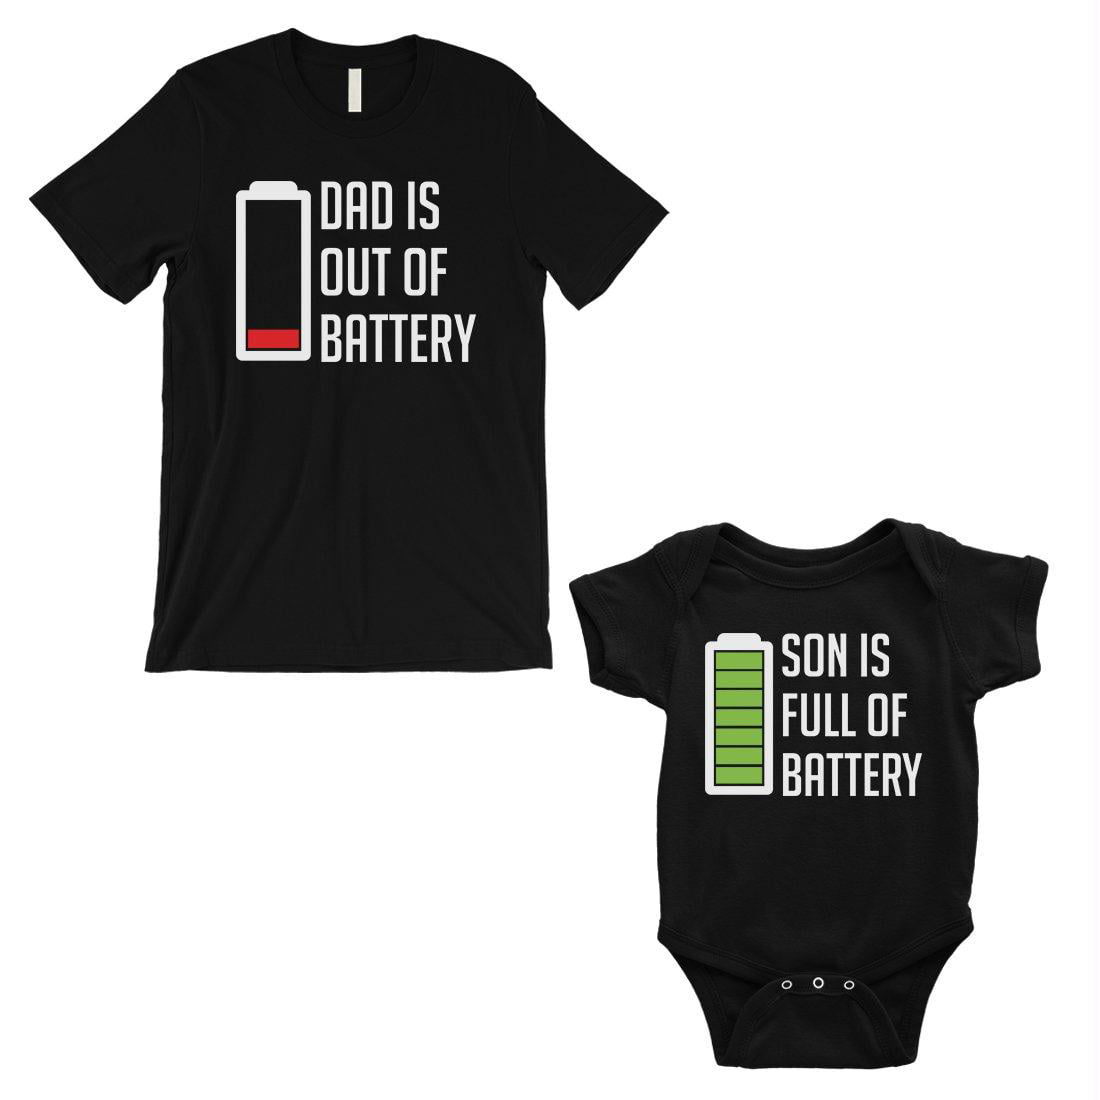 Daddy & Baby matching shirts Full low Battery outfit T-shirt Bodysuit vest Gift 